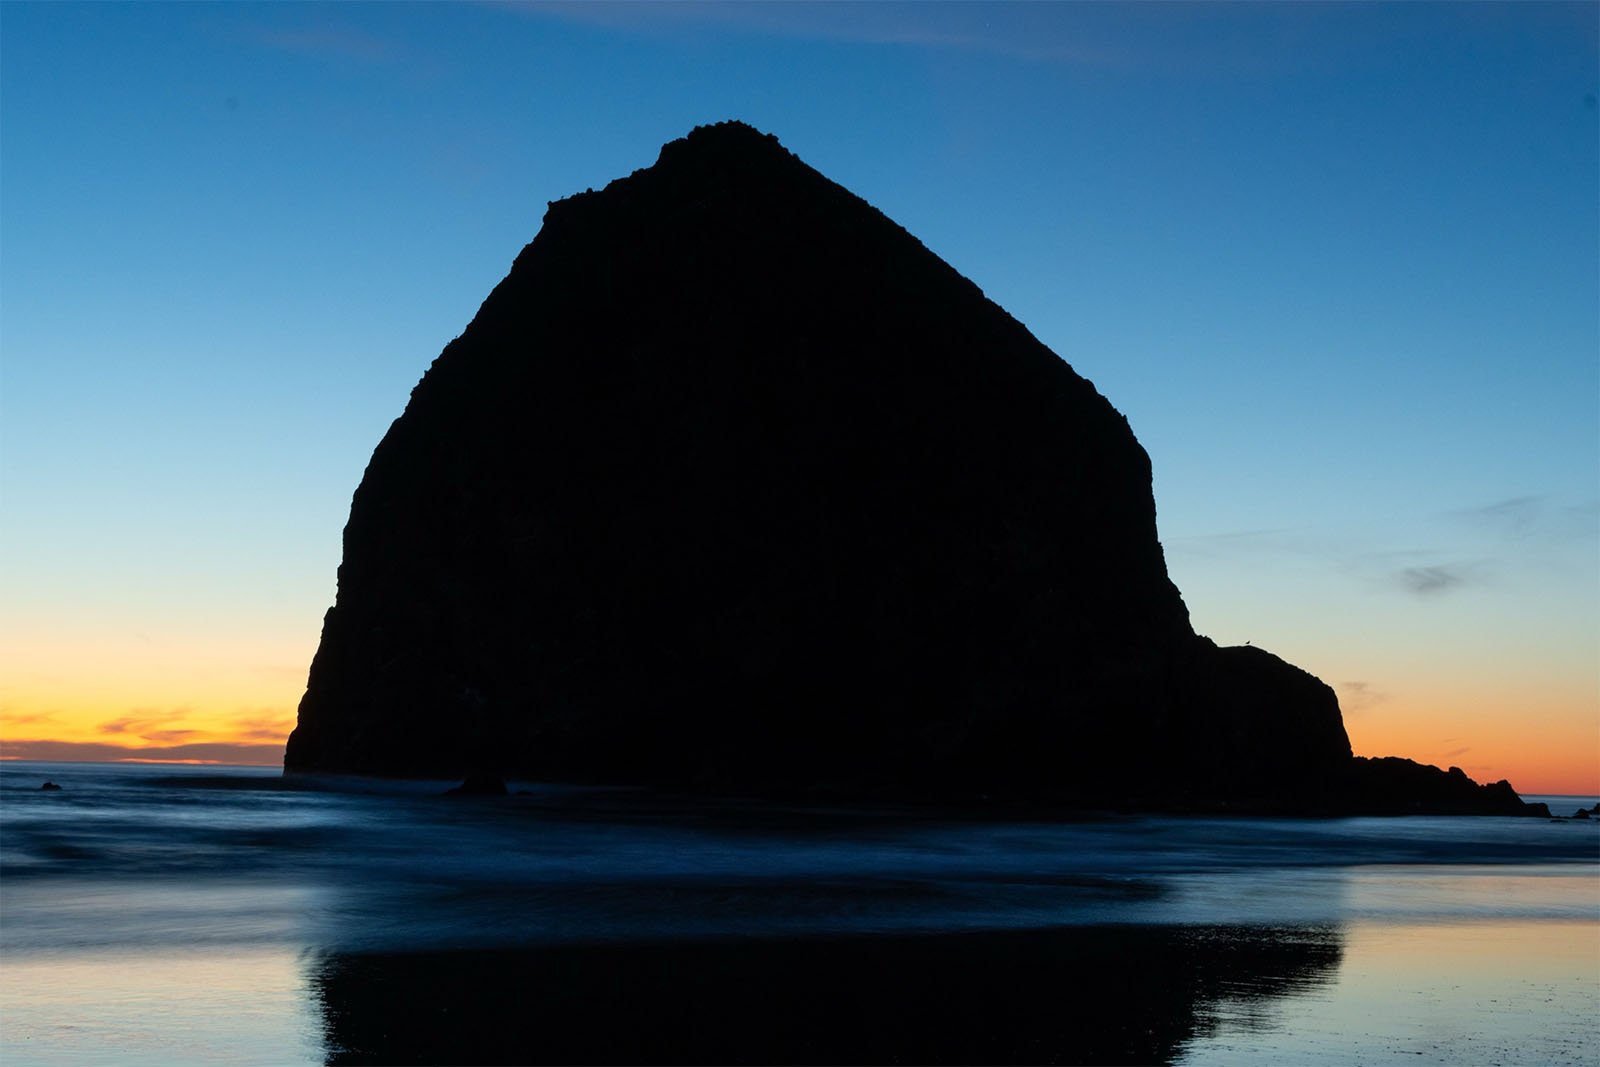 Silhouette of a large rock formation on a beach at sunset, with an orange and blue sky reflected on the wet sand.